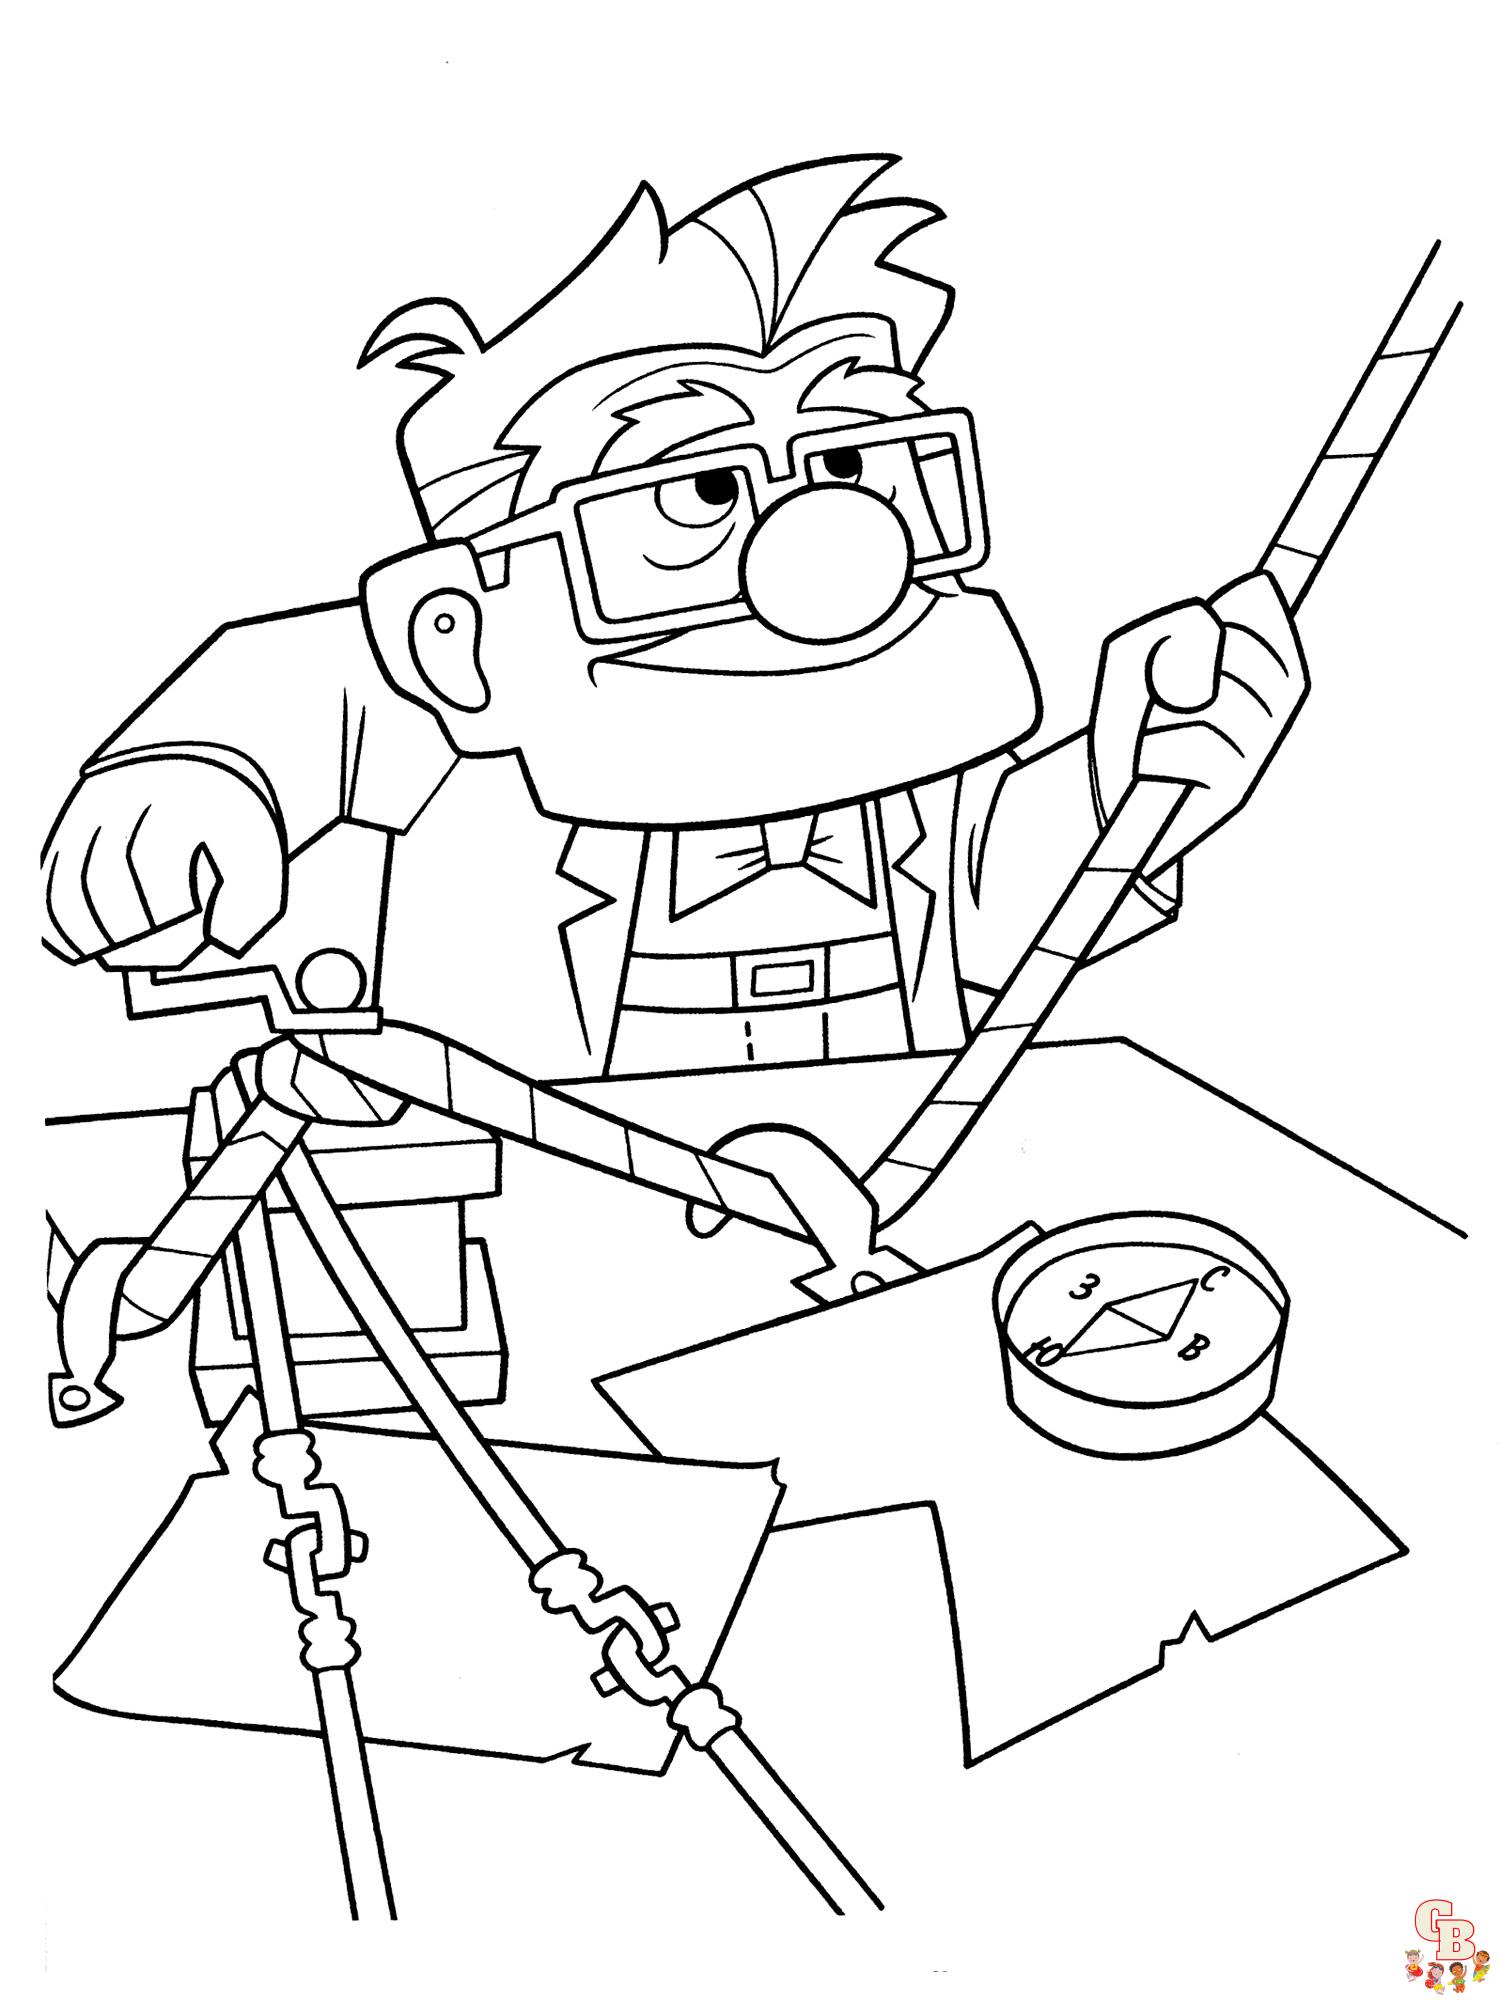 Up coloring pages 24